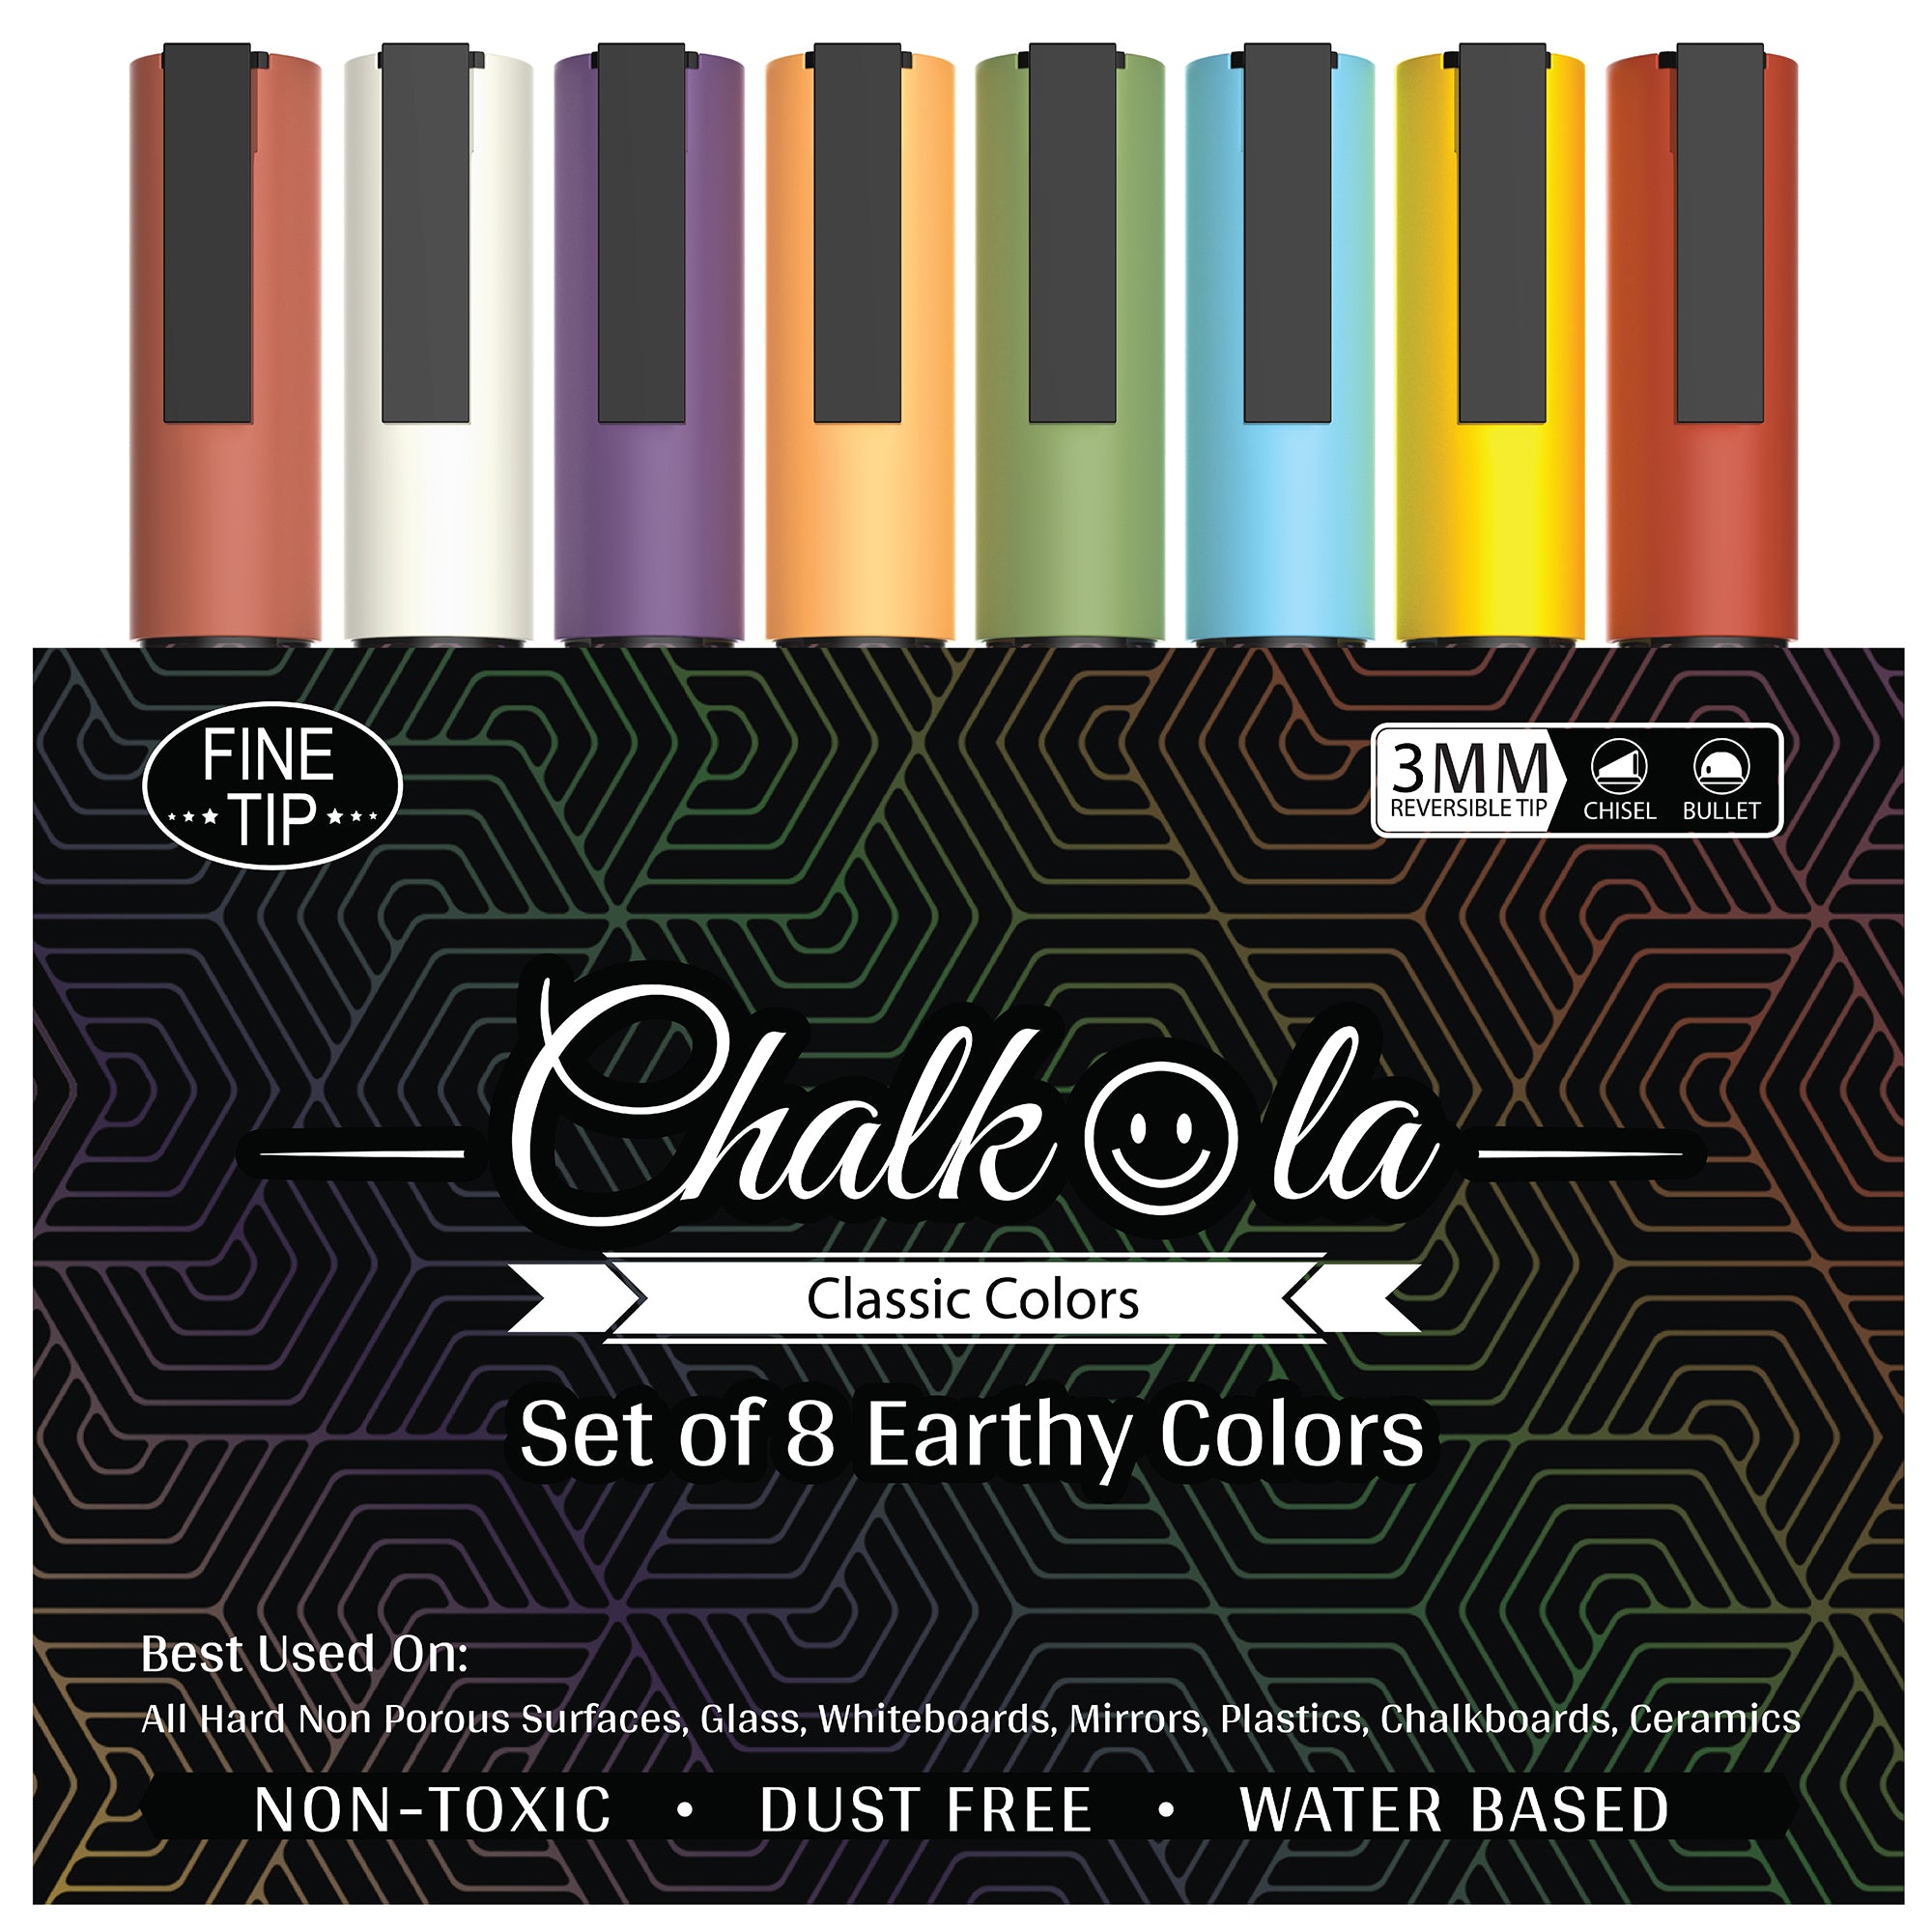  Liquid Chalk Markers For Chalkboard - Wet Erase Dustless Washable  Paint Pens With Bold and Fine Tip - Use On Window Glass Blackboard White  Board and Bistro Signs - 8